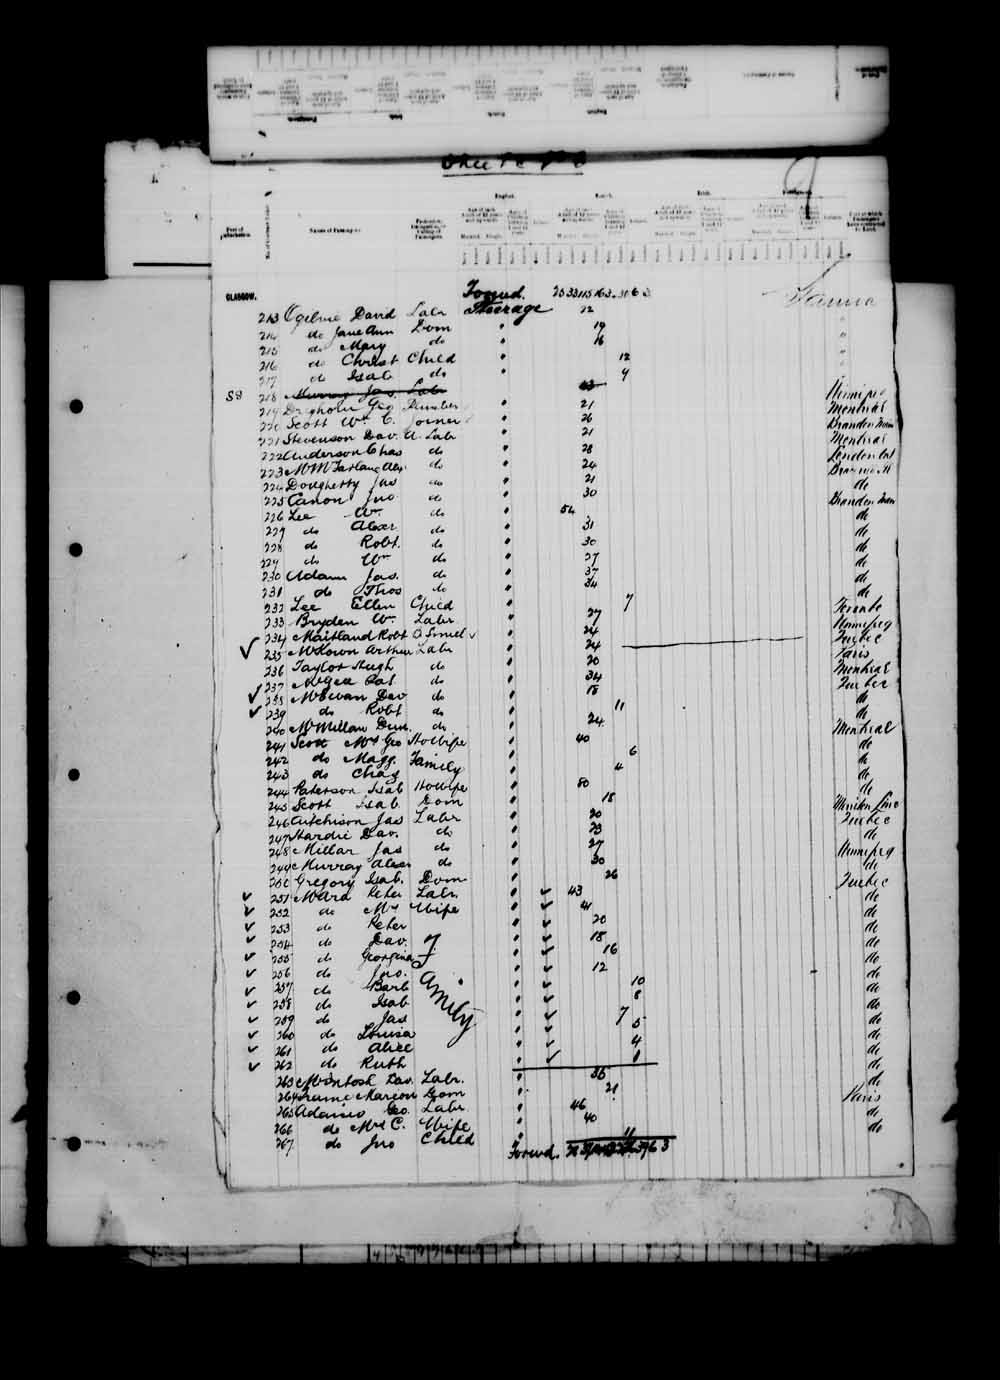 Digitized page of Passenger Lists for Image No.: e003542772